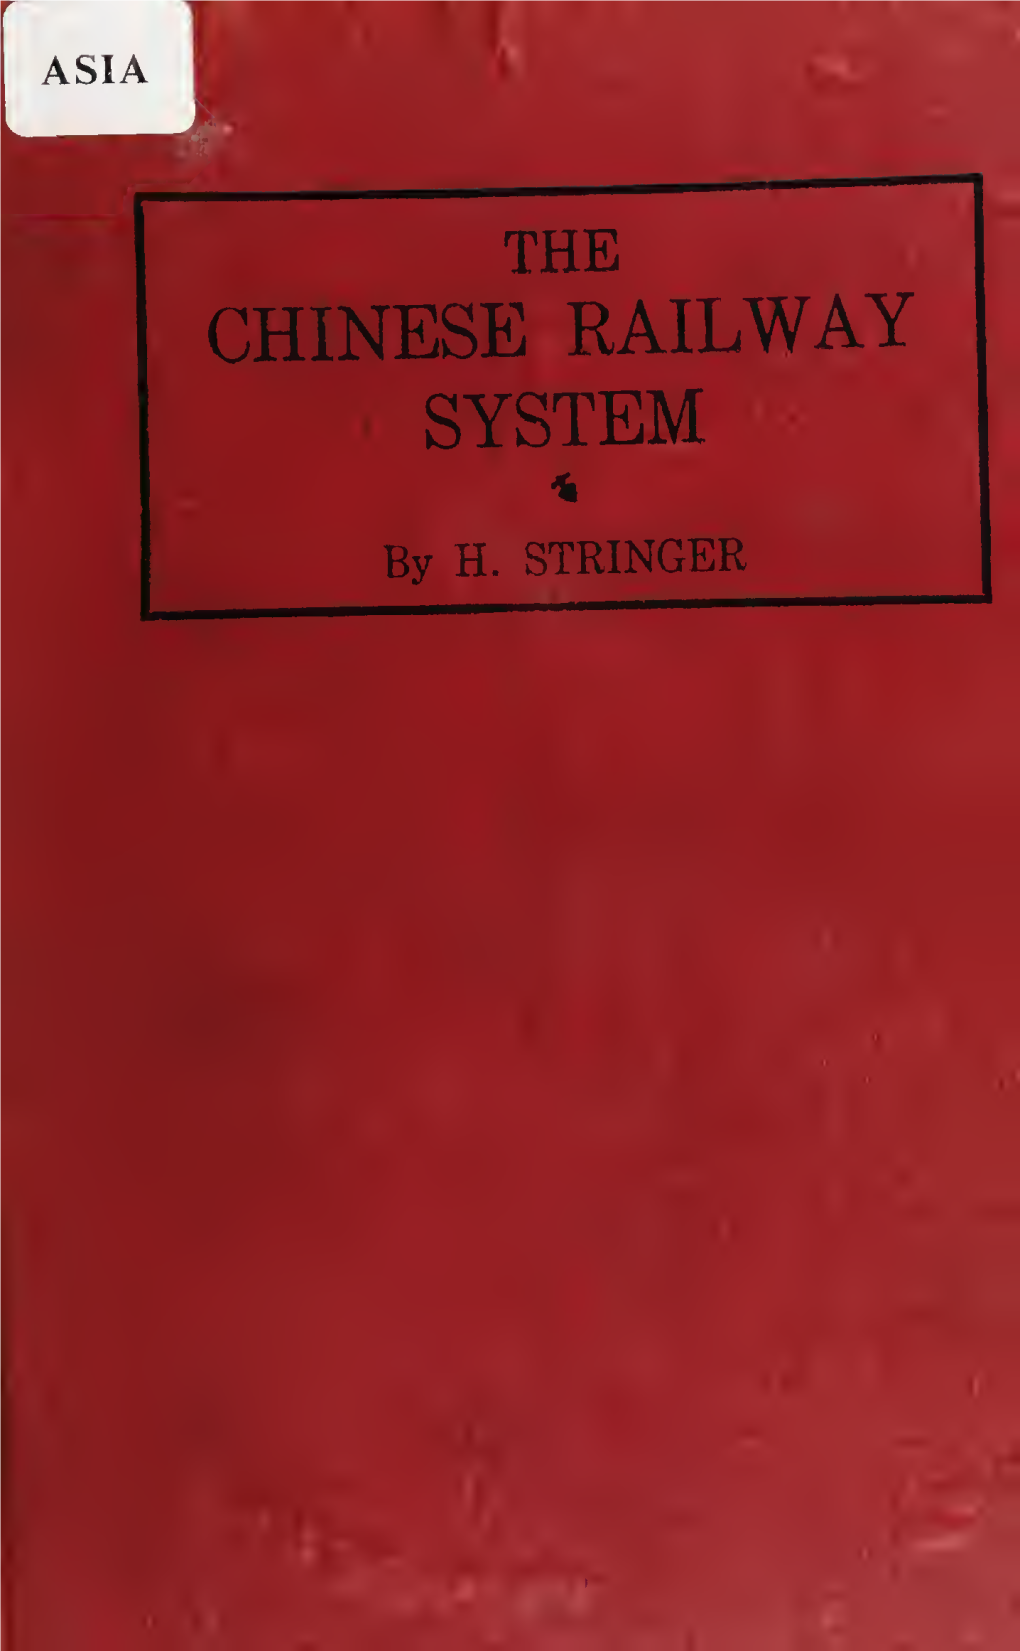 The Chinese Railway System